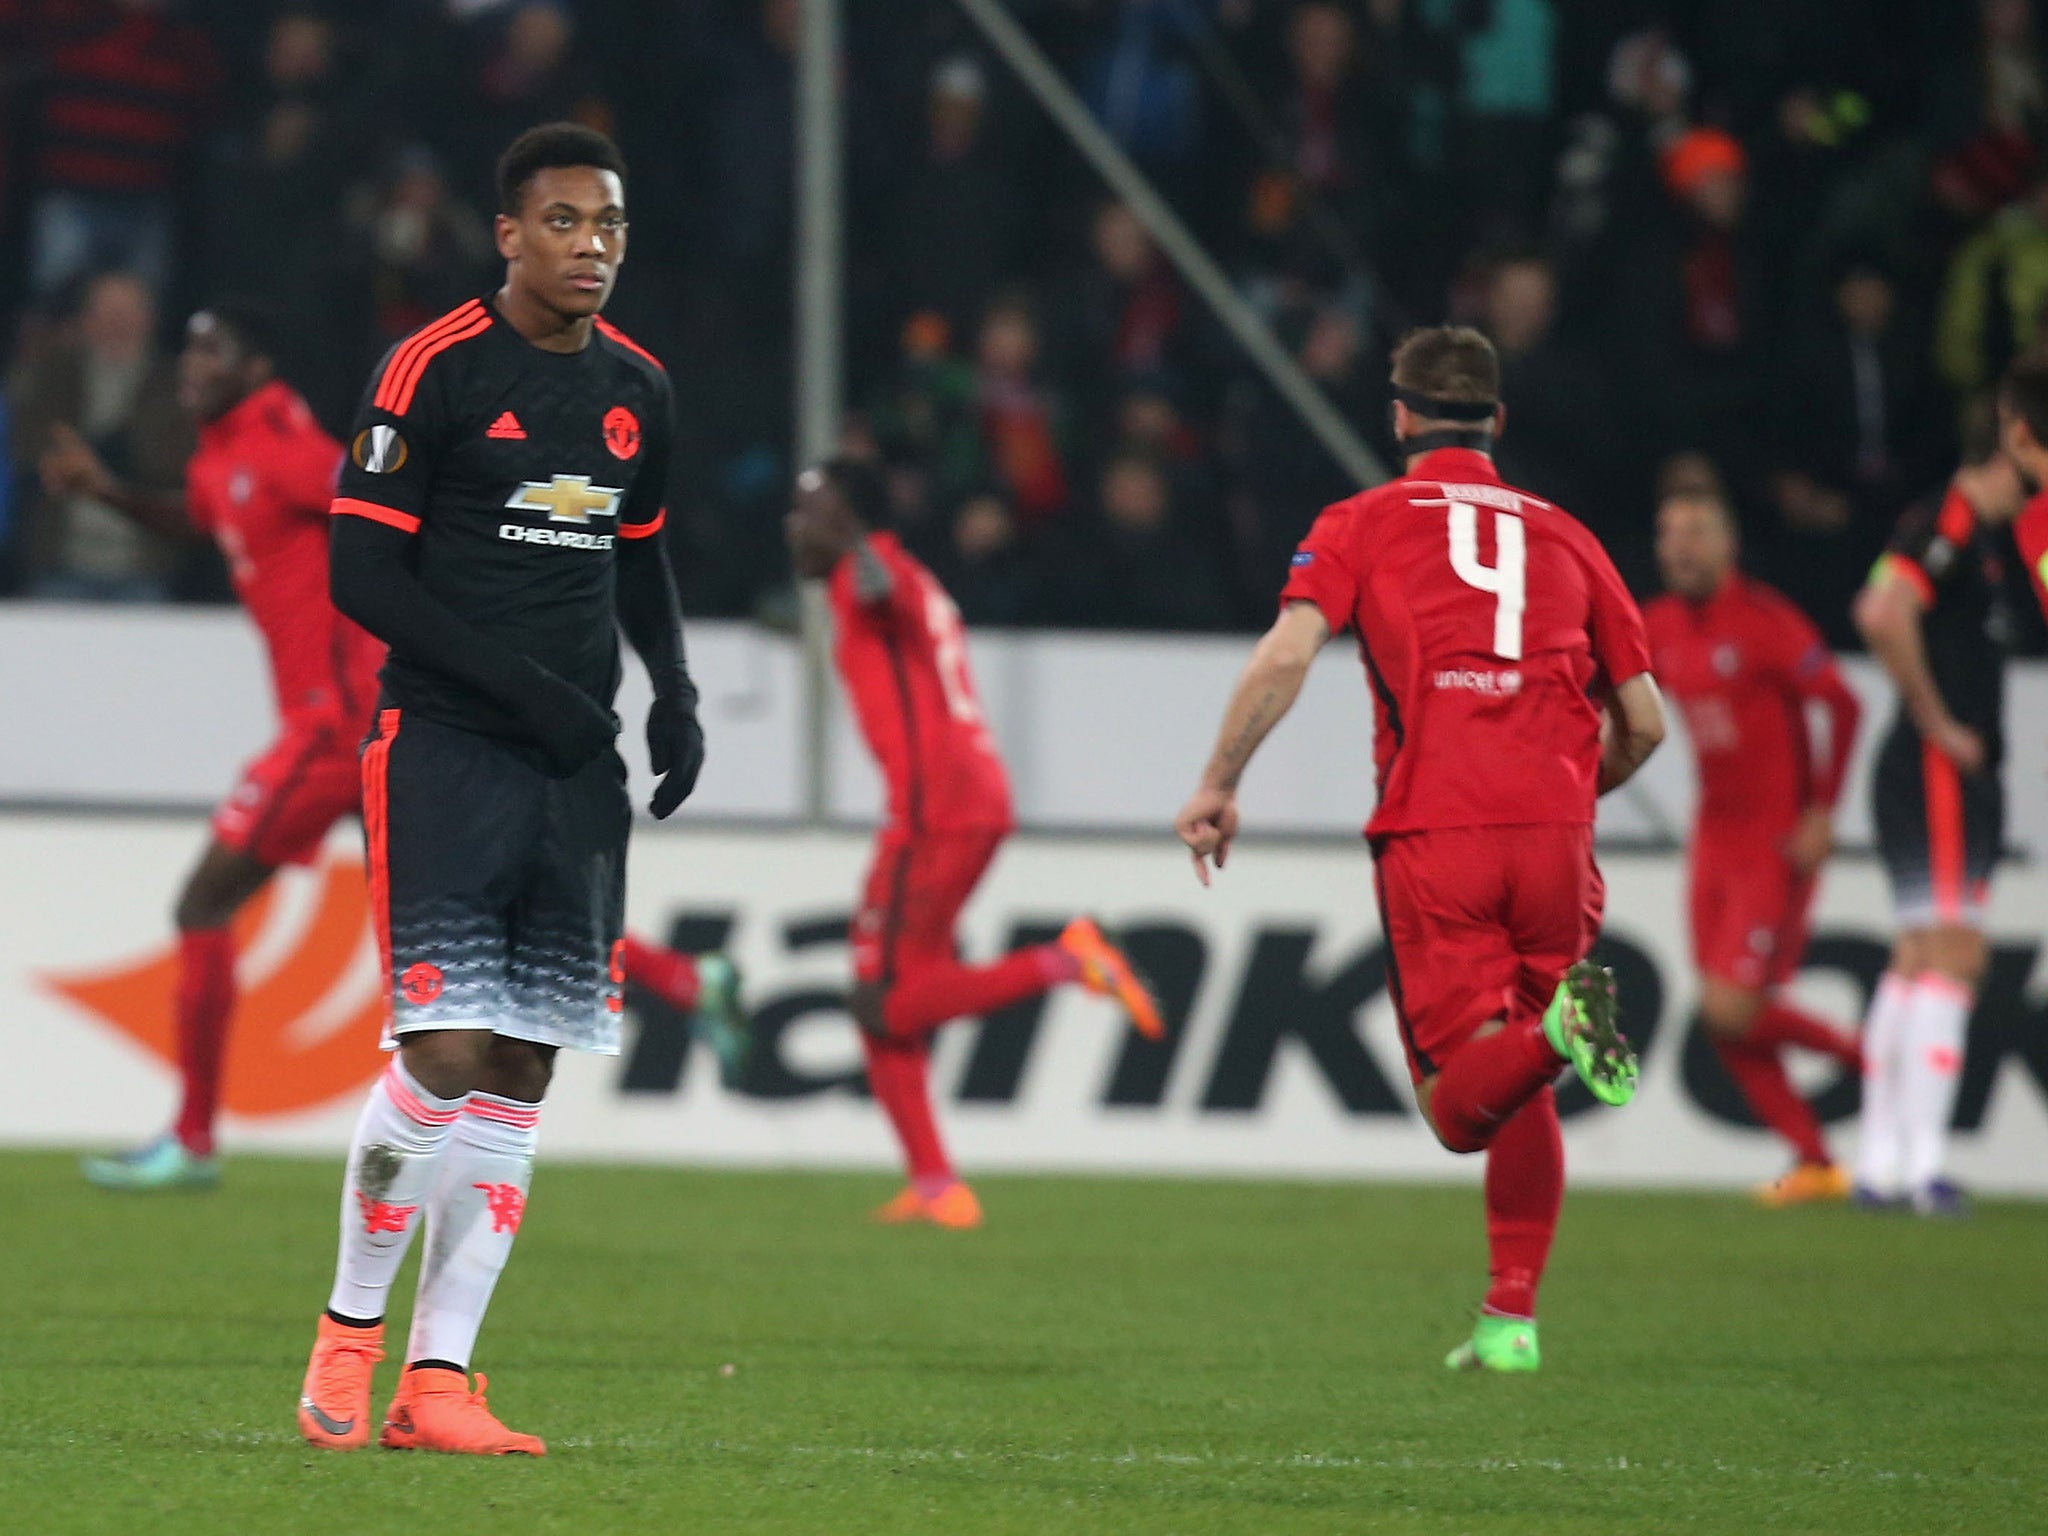 Anthony Martial turns his back as Midtylland's players celebrate their winning goal